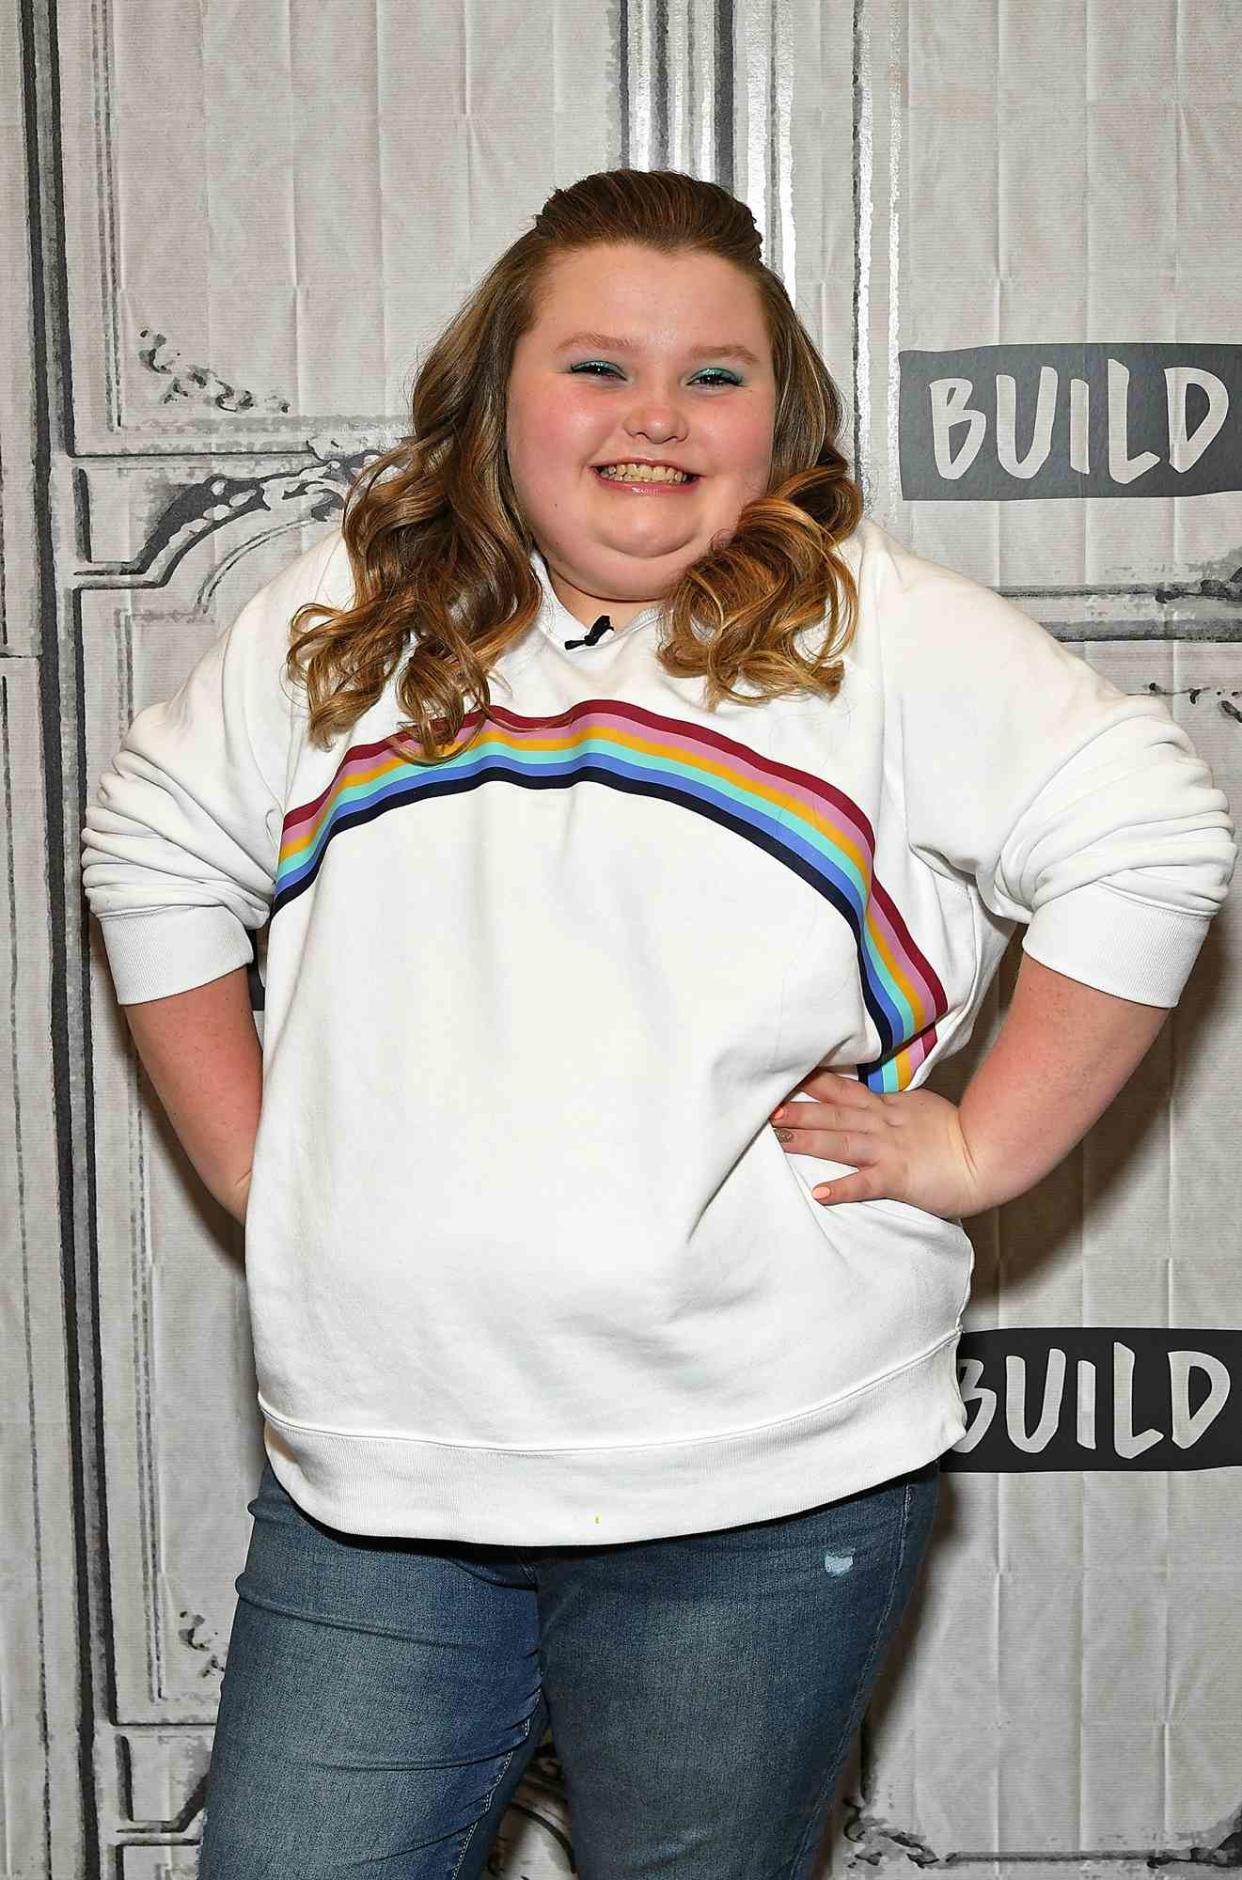 Alana "Honey Boo Boo" Thompson from TLC's reality TV series "Here Comes Honey Boo Boo" attends Build Brunch at Build Studio on March 14, 2019 in New York City.